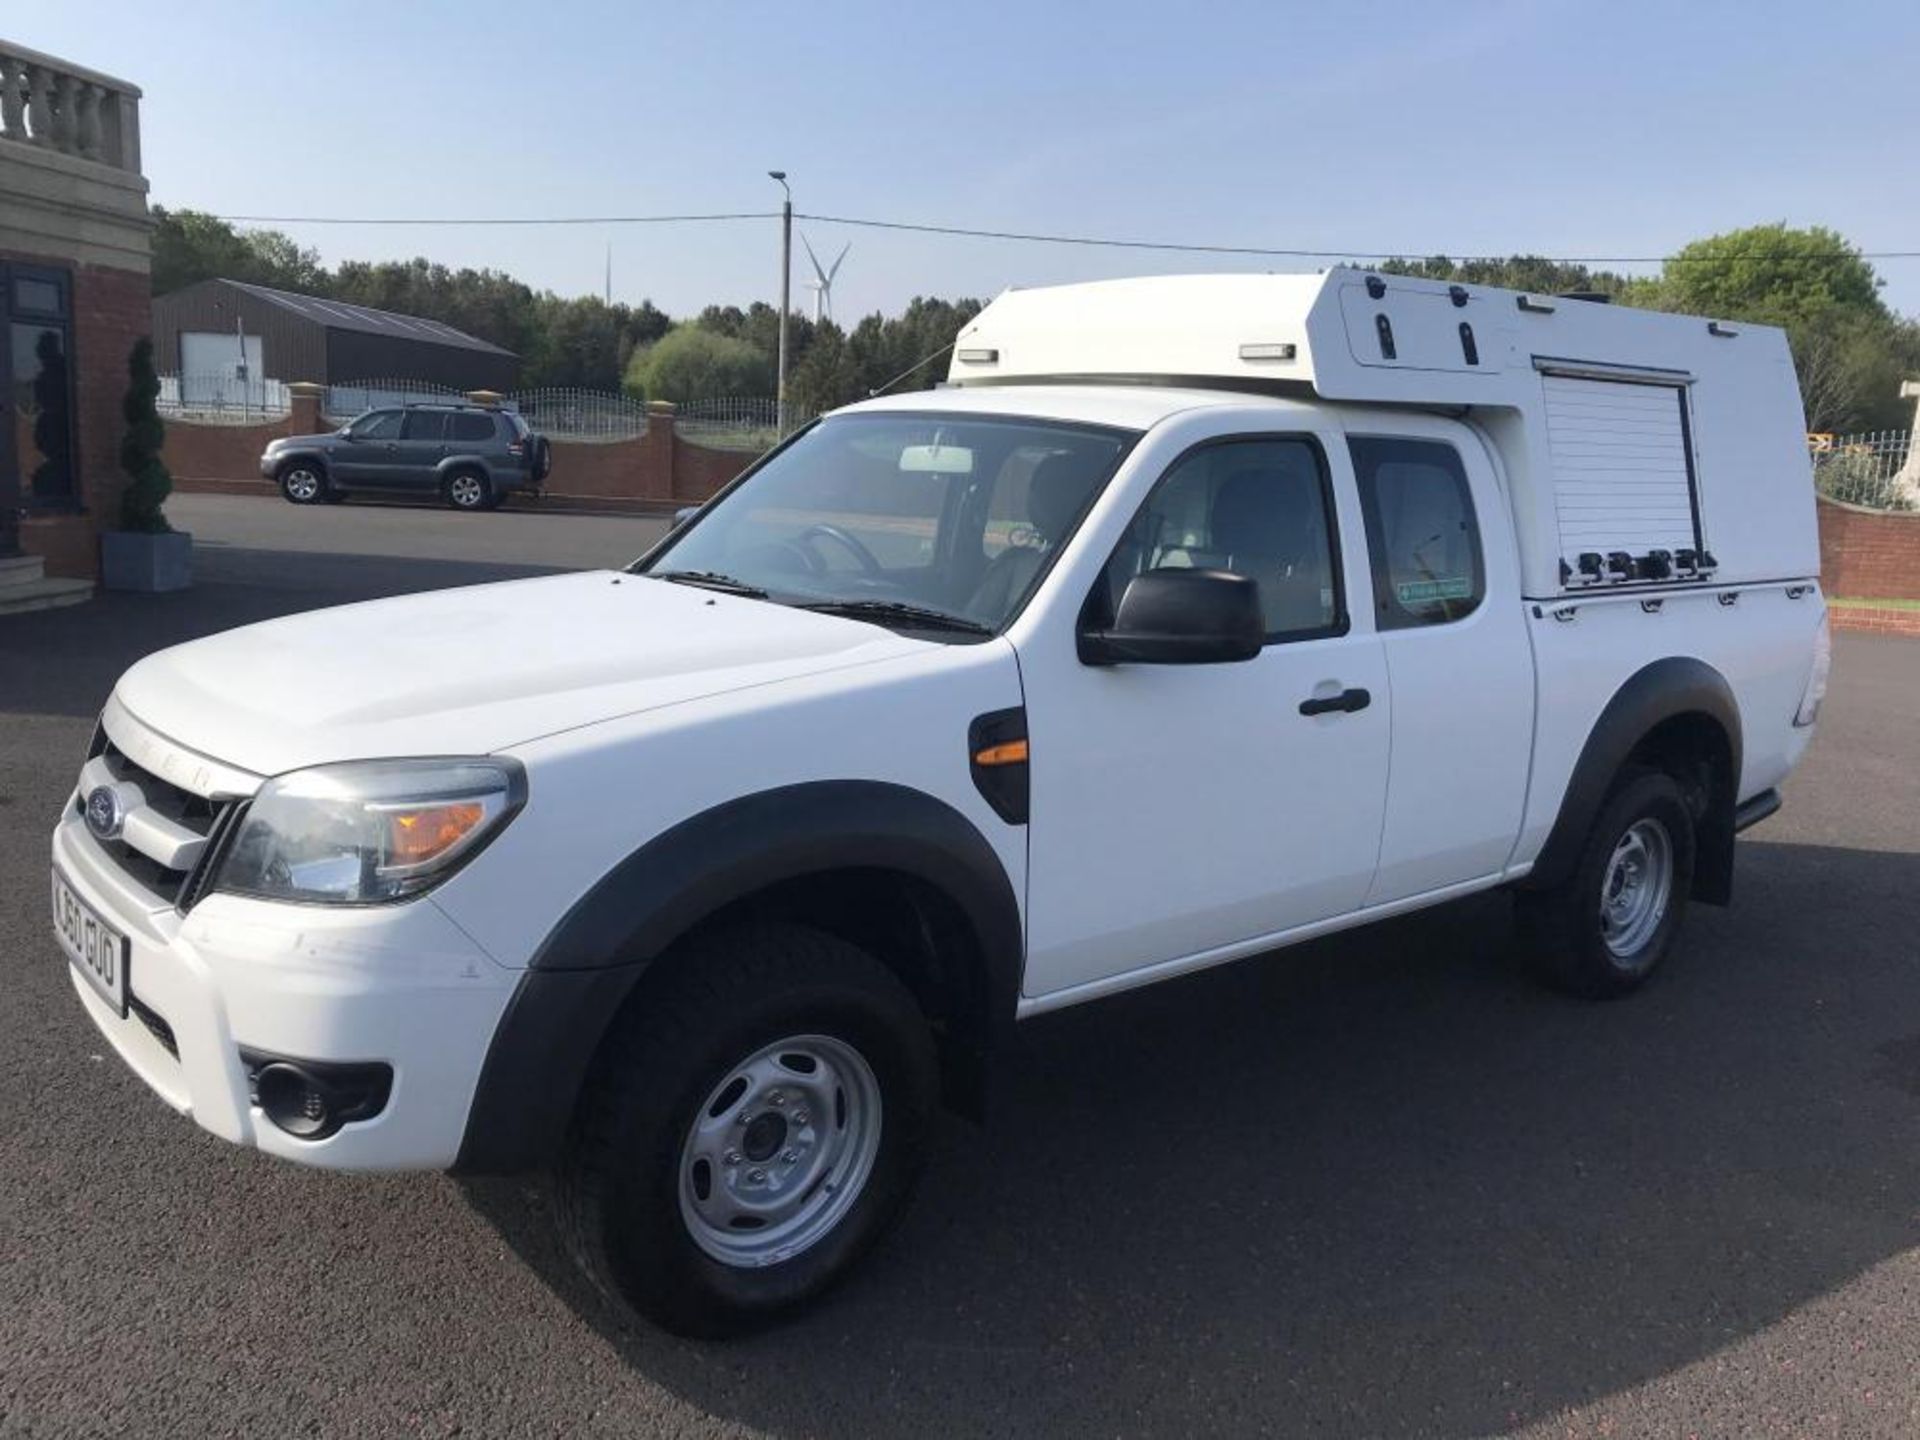 2010/60 REG FORD RANGER XL 4X4 DOUBLE CAB TDCI 2.5 DIESEL WHITE PICK-UP, SHOWING 0 FORMER KEEPERS - Bild 2 aus 21